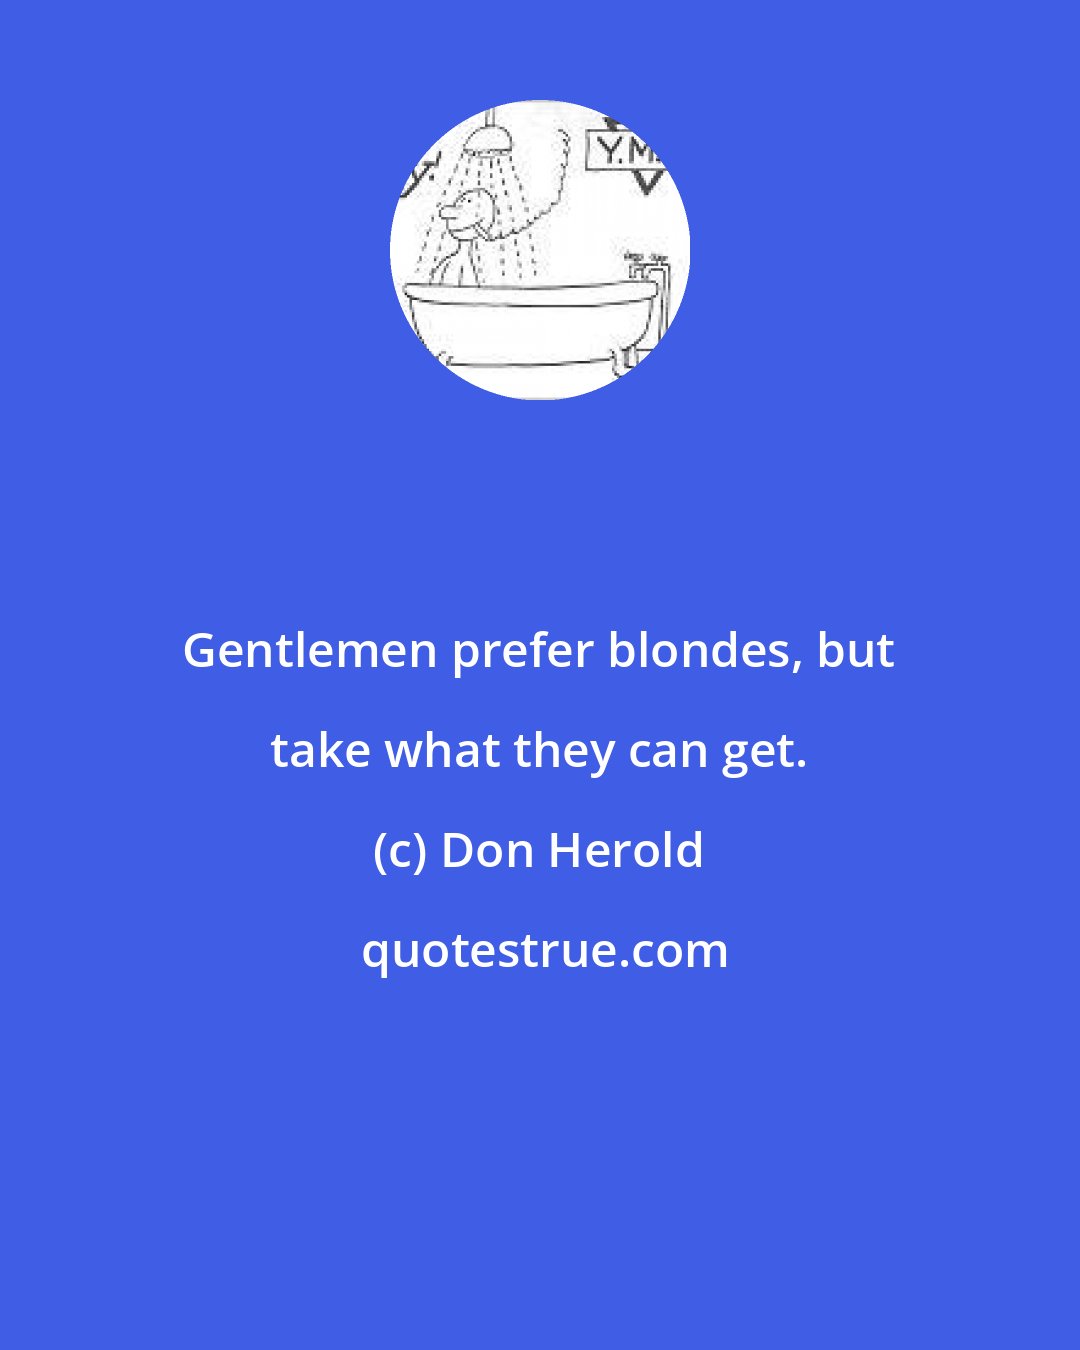 Don Herold: Gentlemen prefer blondes, but take what they can get.